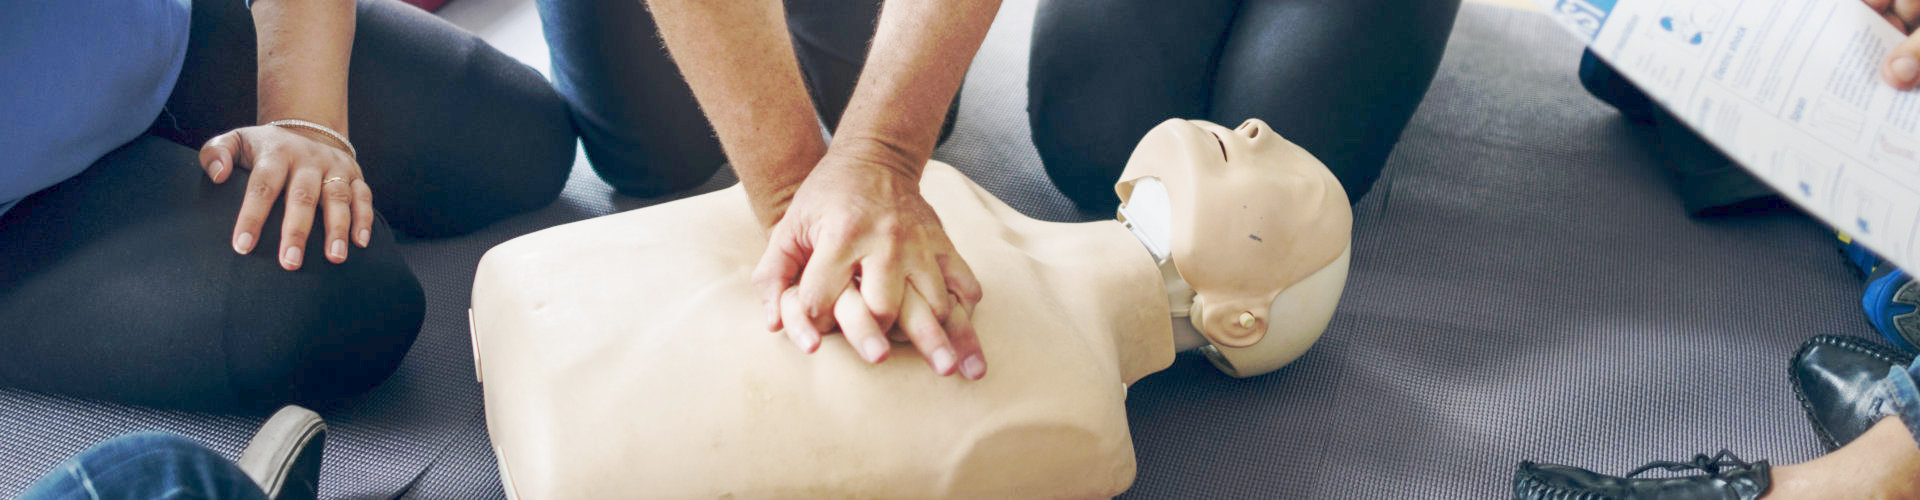 cpr first aid training